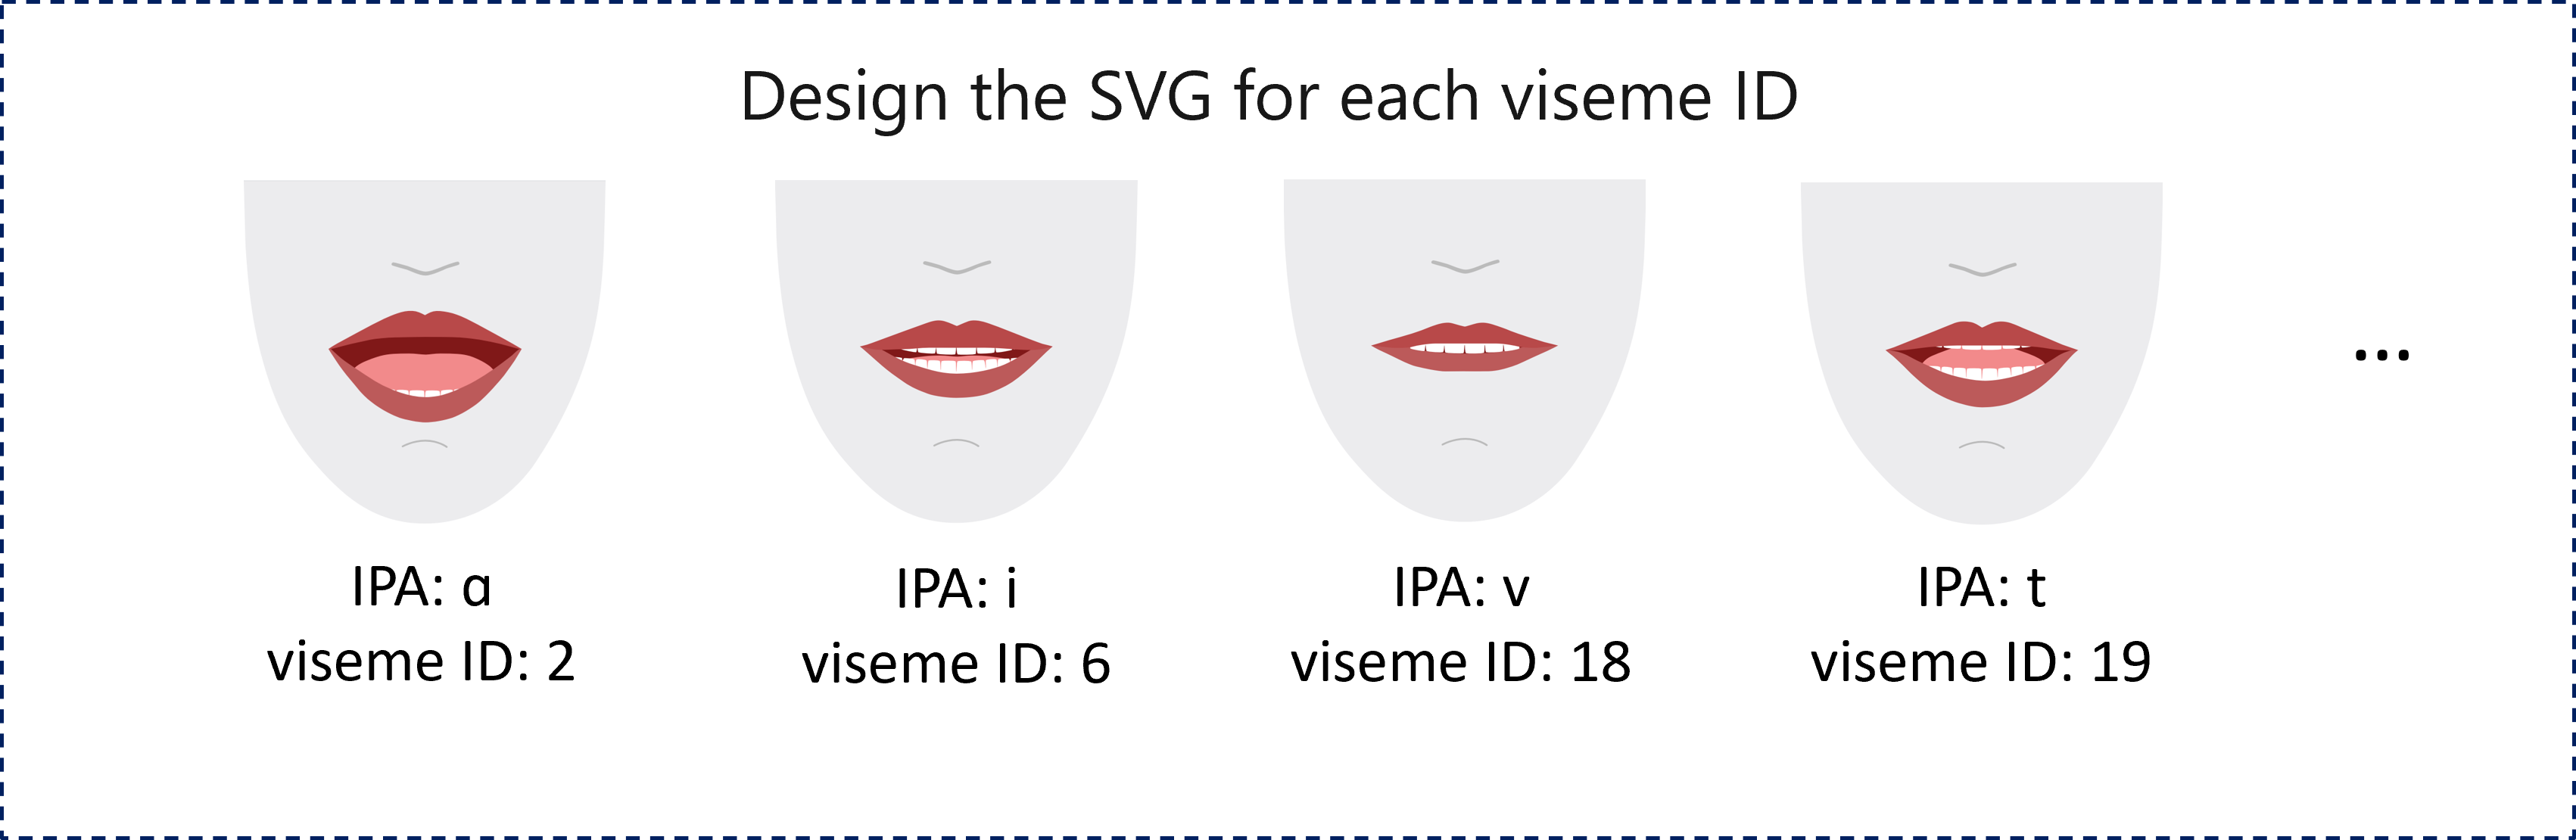 Screenshot showing a 2D rendering example of four red-lipped mouths, each representing a different viseme ID that corresponds to a phoneme.